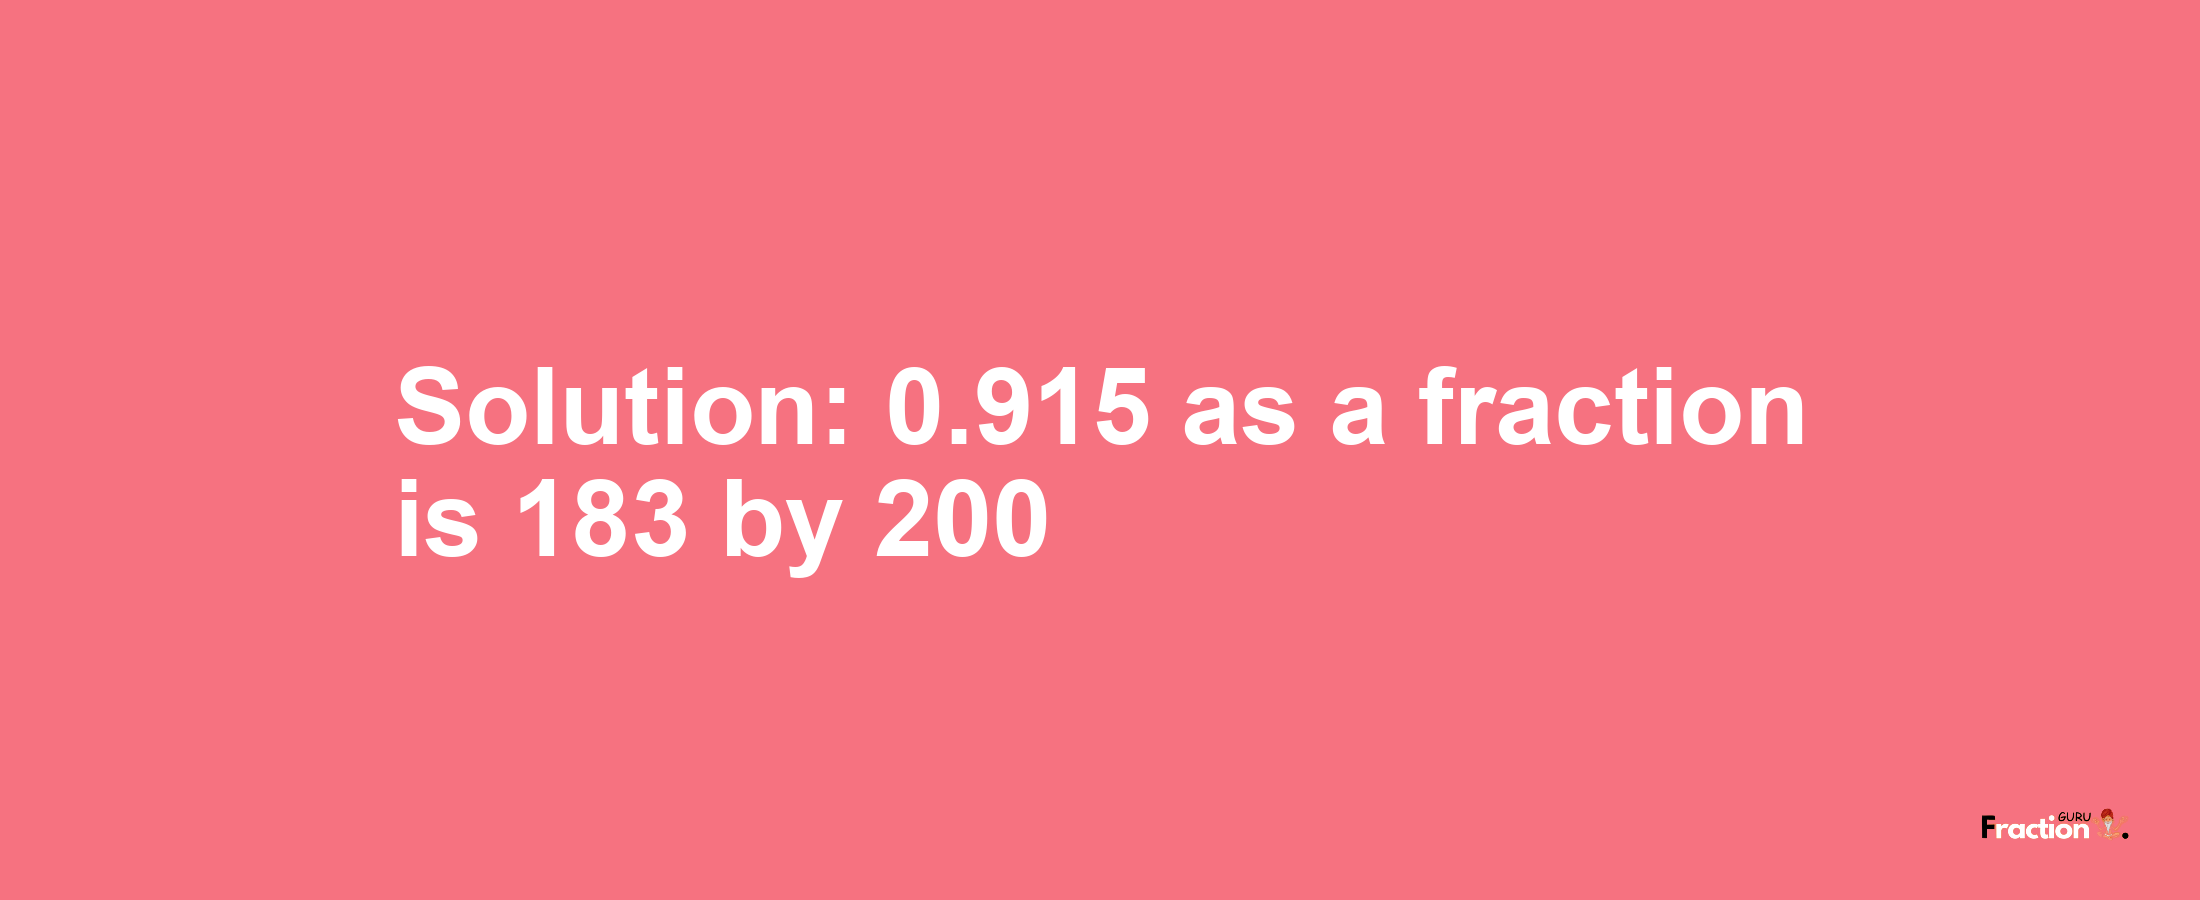 Solution:0.915 as a fraction is 183/200